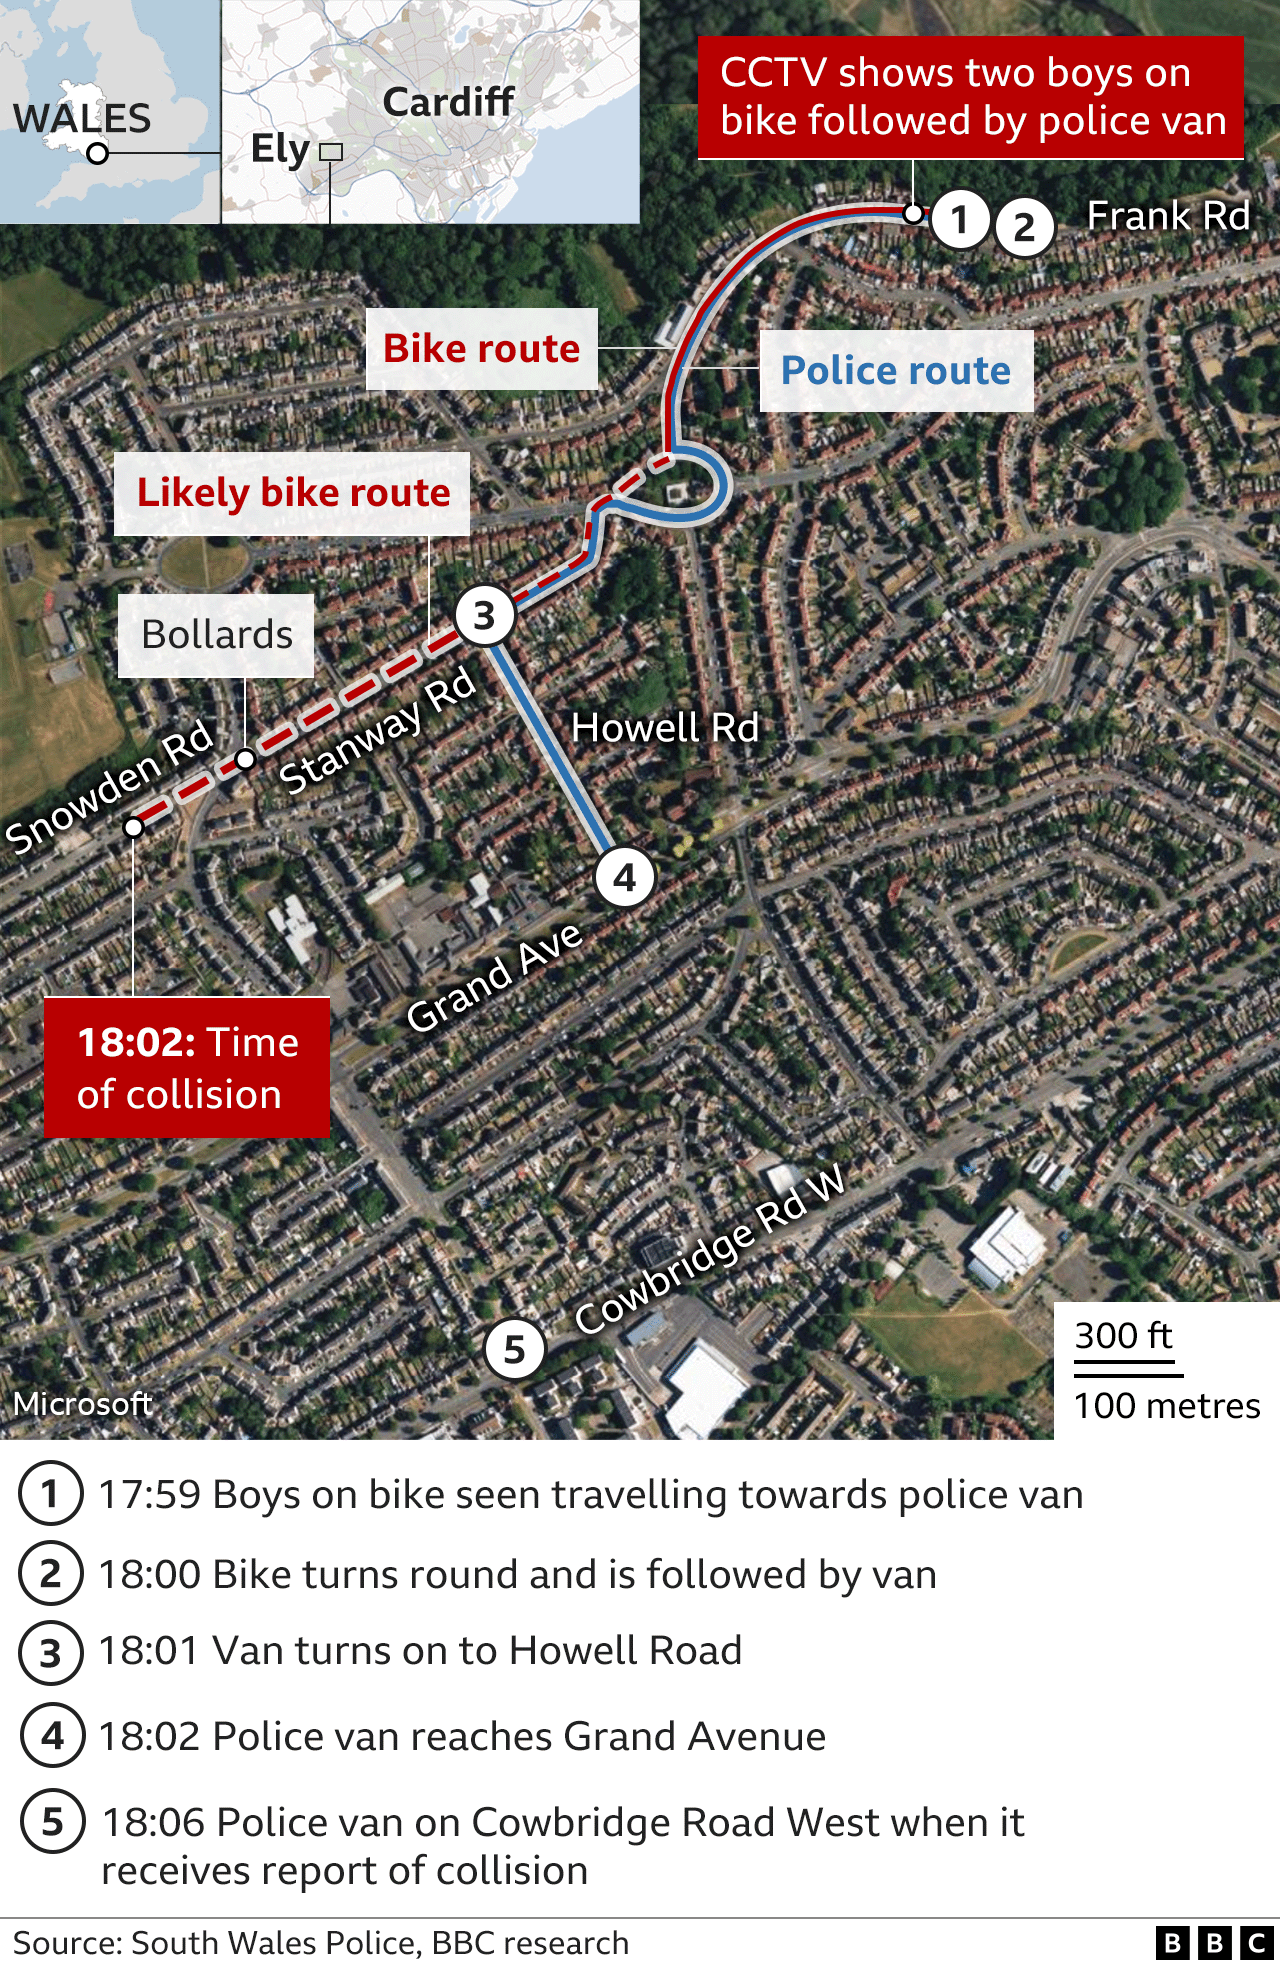 Map showing Ely in Cardiff and scene of fatal crash involving two teenagers at 18:02 on 22 May in Snowden Road. It shows the route of a police van which followed the boys and their likely route. Timings given are: 17:59 Boys on bike seen travelling towards police van; 18:00 Bike turns round and is followed by van; 18:01 Van follows bike before turning on to Howell Road; 18:02 Police van turns on to Grand Avenue; 18:06 Police van on Cowbridge Road West when it receives report of collision